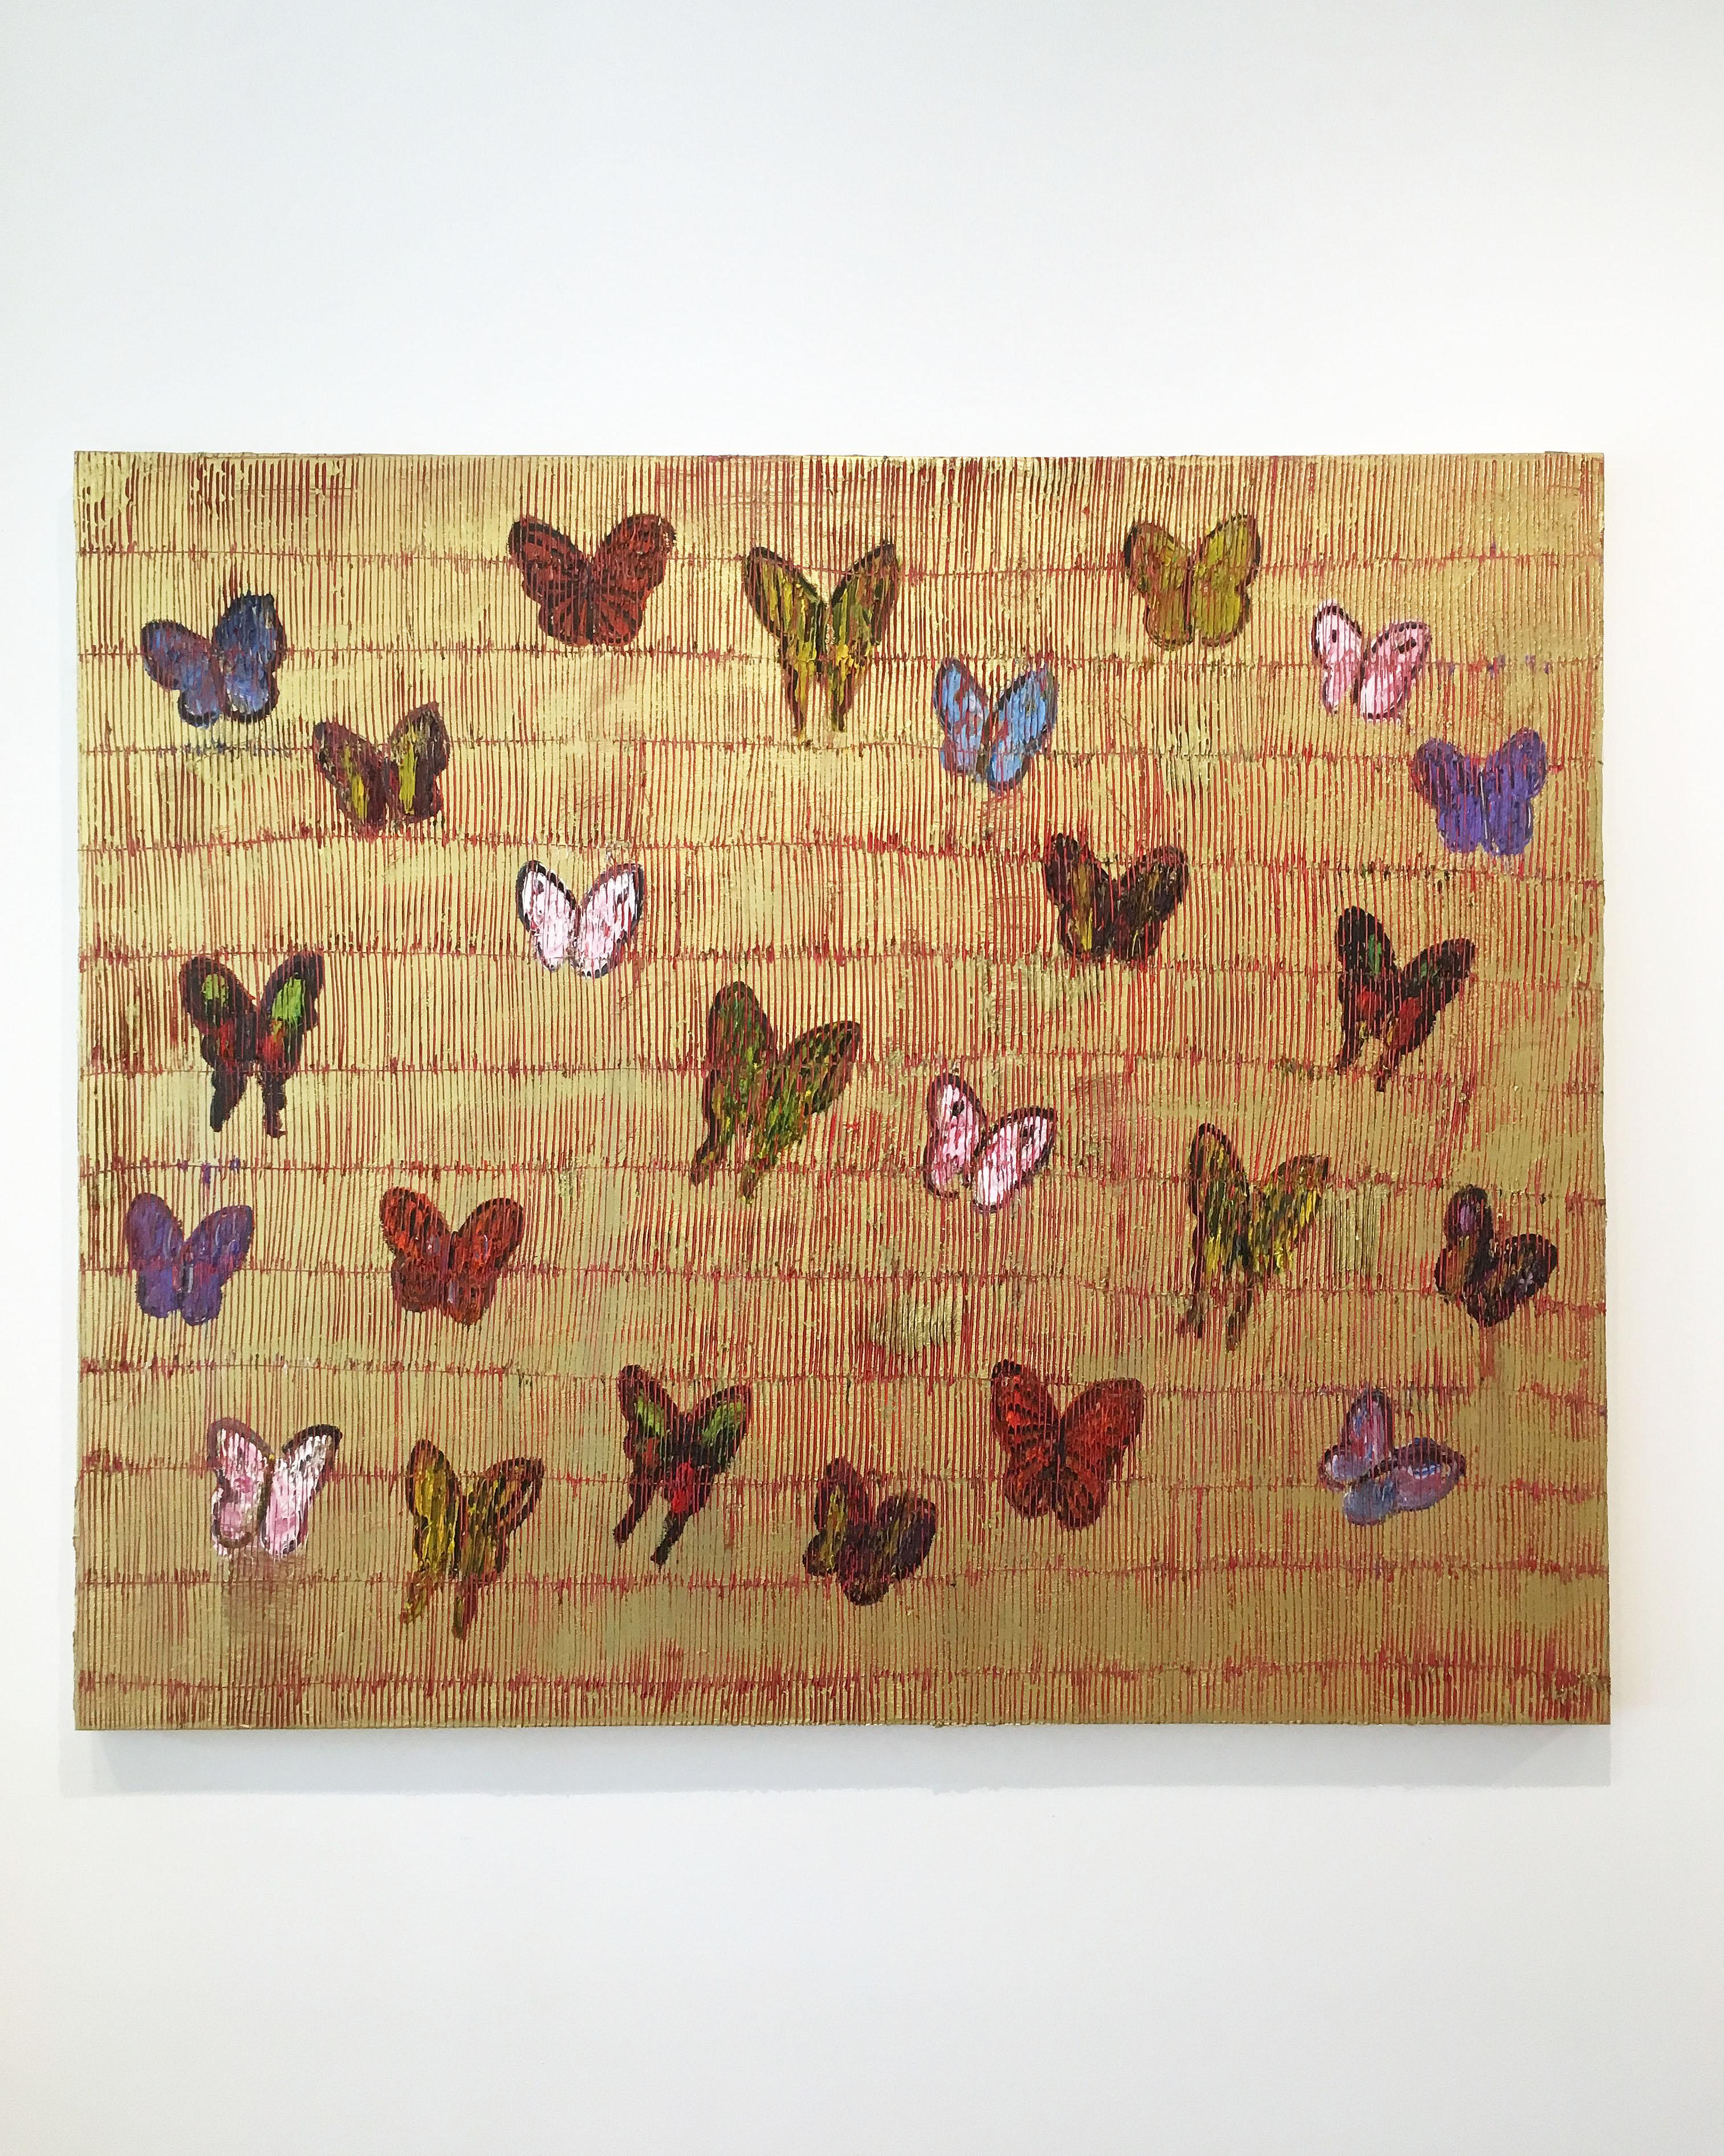 'Red Parting' 2019 by renowned New York City artist, Hunt Slonem. Oil on canvas, 50 x 60 in. This painting features a charming portrait of butterflies. The artist's ongoing experimentation with unconventional methodologies provide the perfect